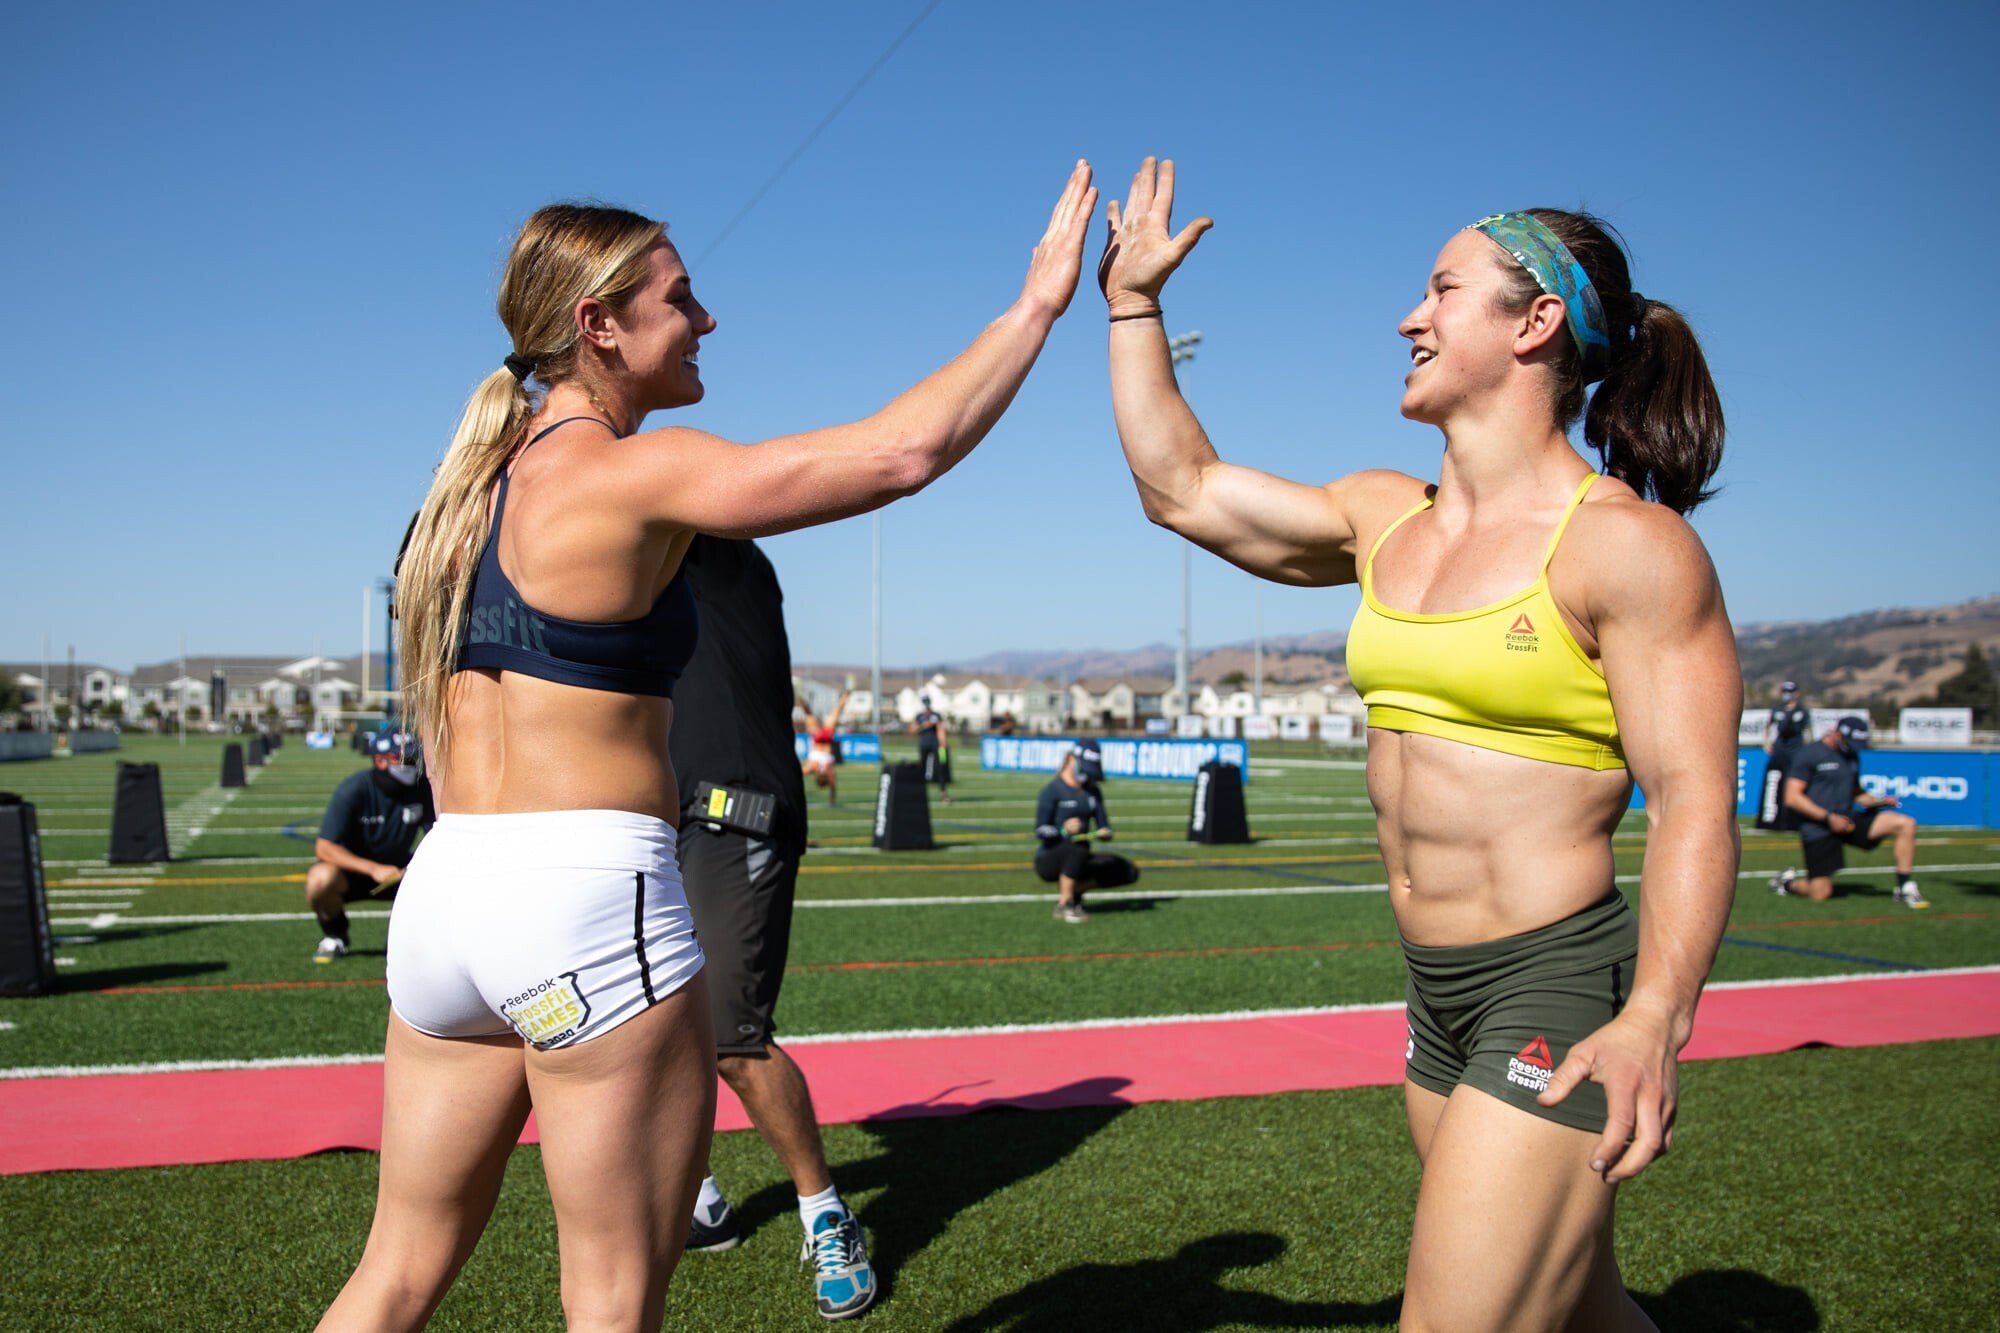 Brooke Wells and Kari Pearce at the 2020 CrossFit Games. Both are looking to upset Tia-Clair Toomey this season as the Australian chases her fifth title. Photo: CrossFit Games